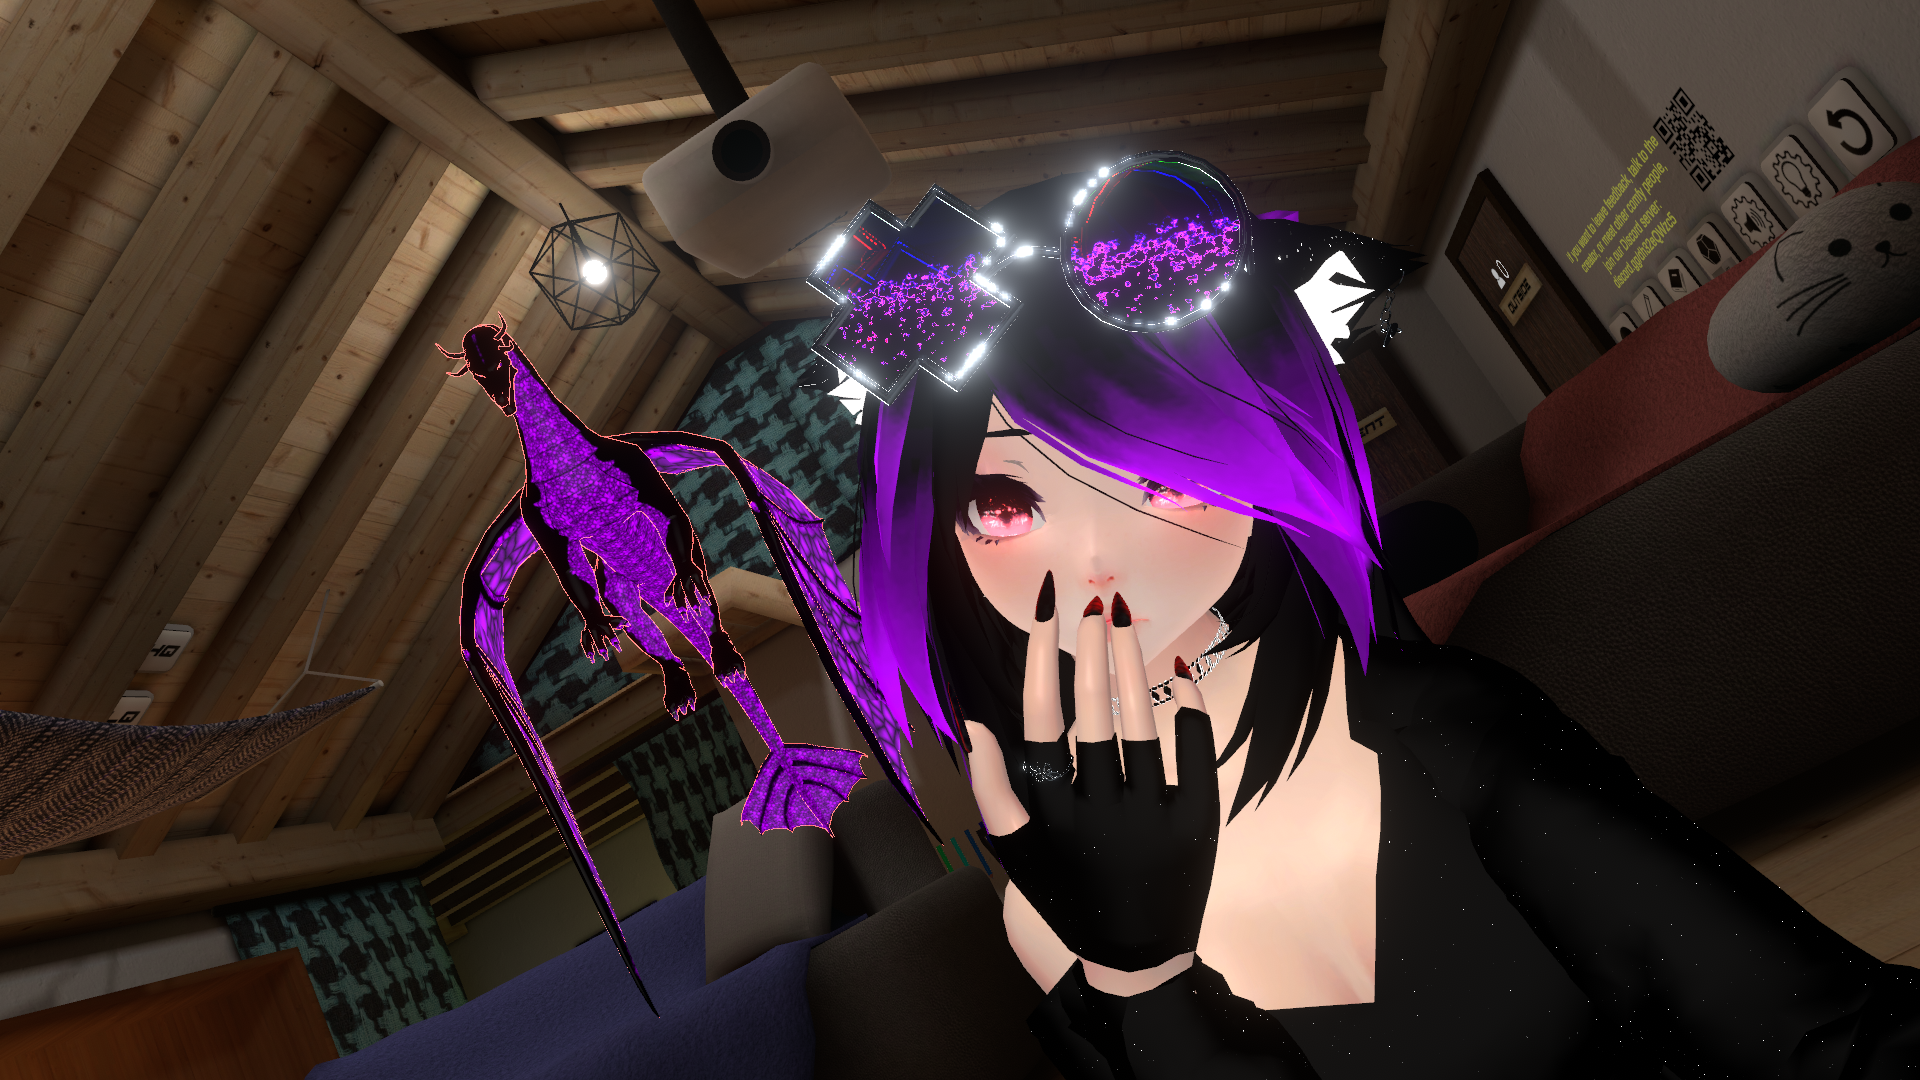 VRChat_1920x1080_2022-04-26_02-49-42.406.png